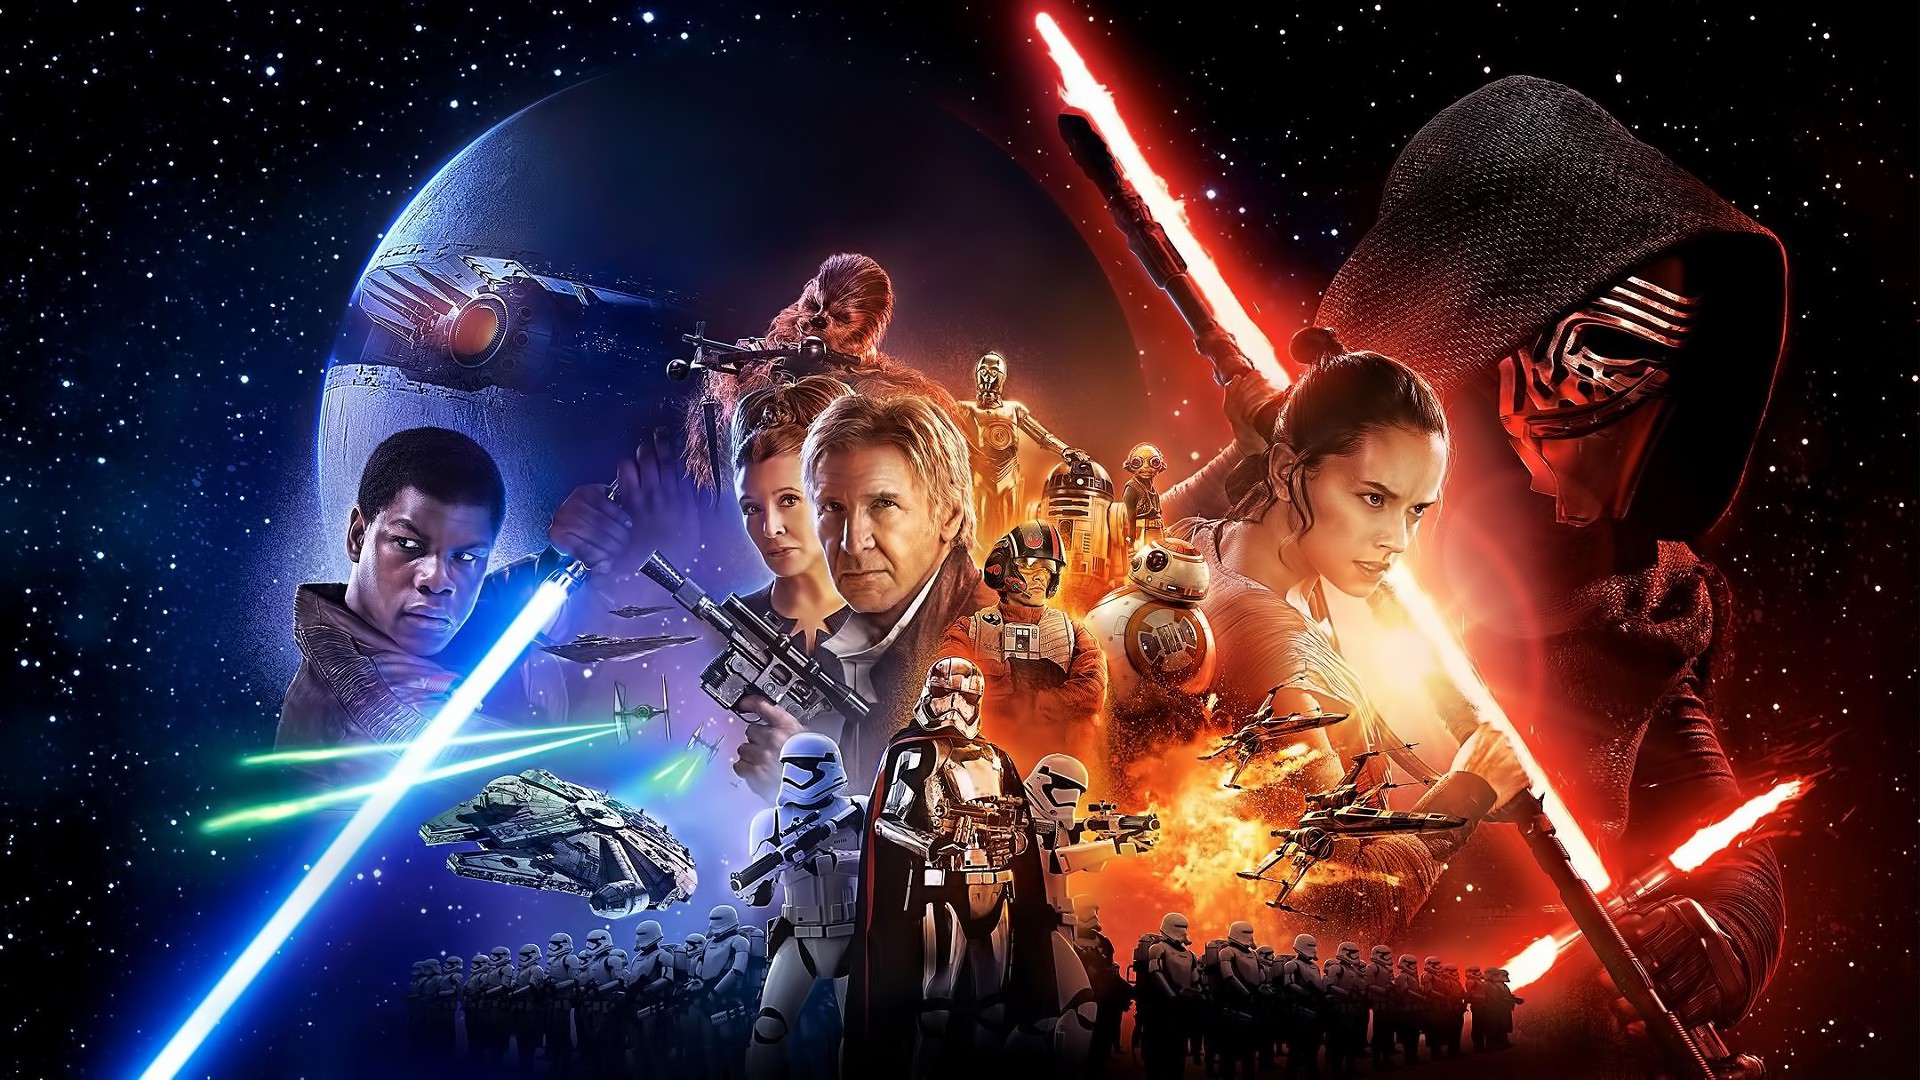 star wars the force awakens free full movie pc no download